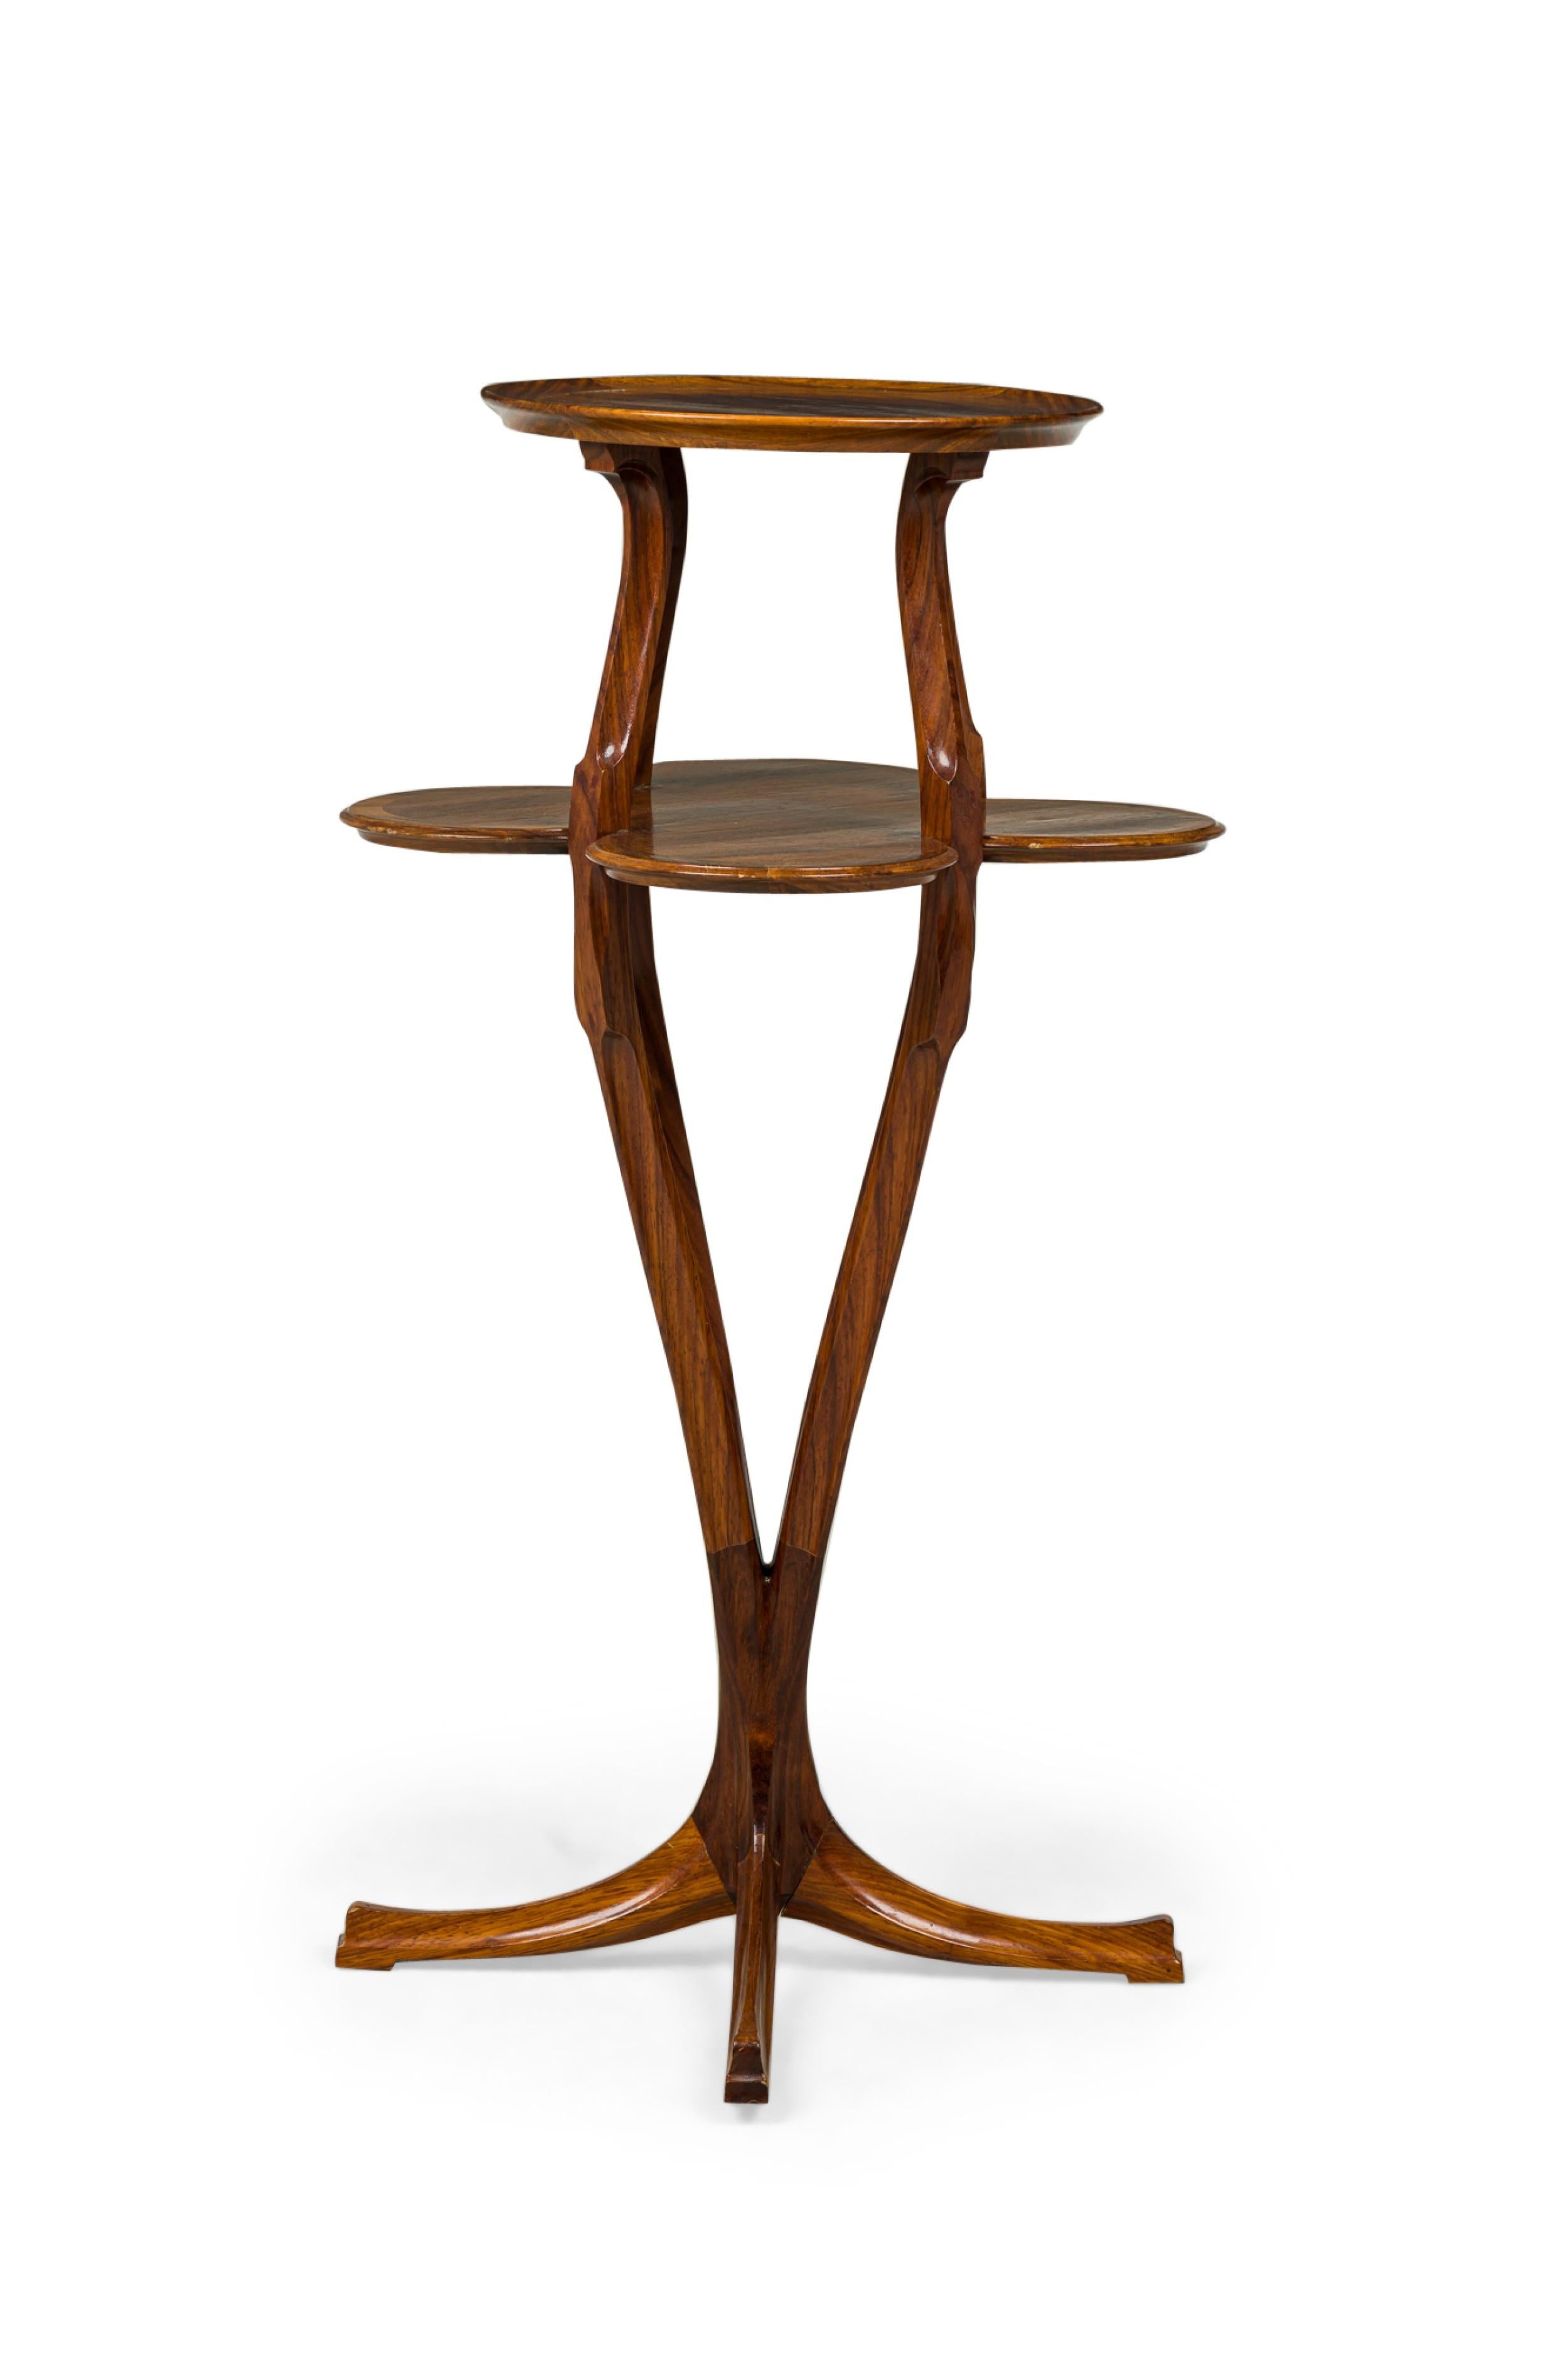 Carved Tony Selmersheim French Art Nouveau Two-Tier Clover Pedestal Table For Sale